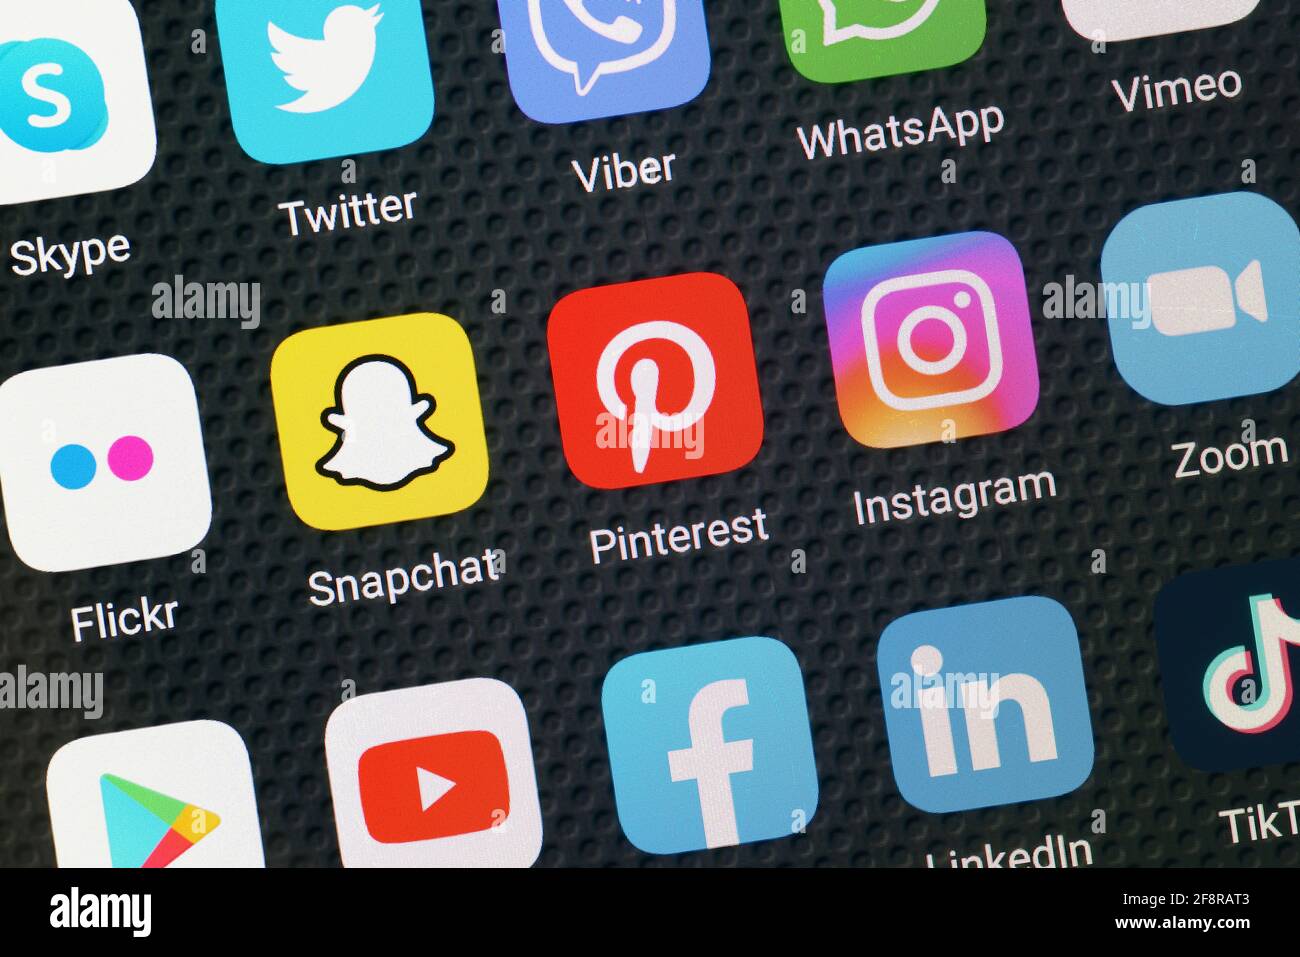 Social Media App Icons on a Smartphone Stock Photo